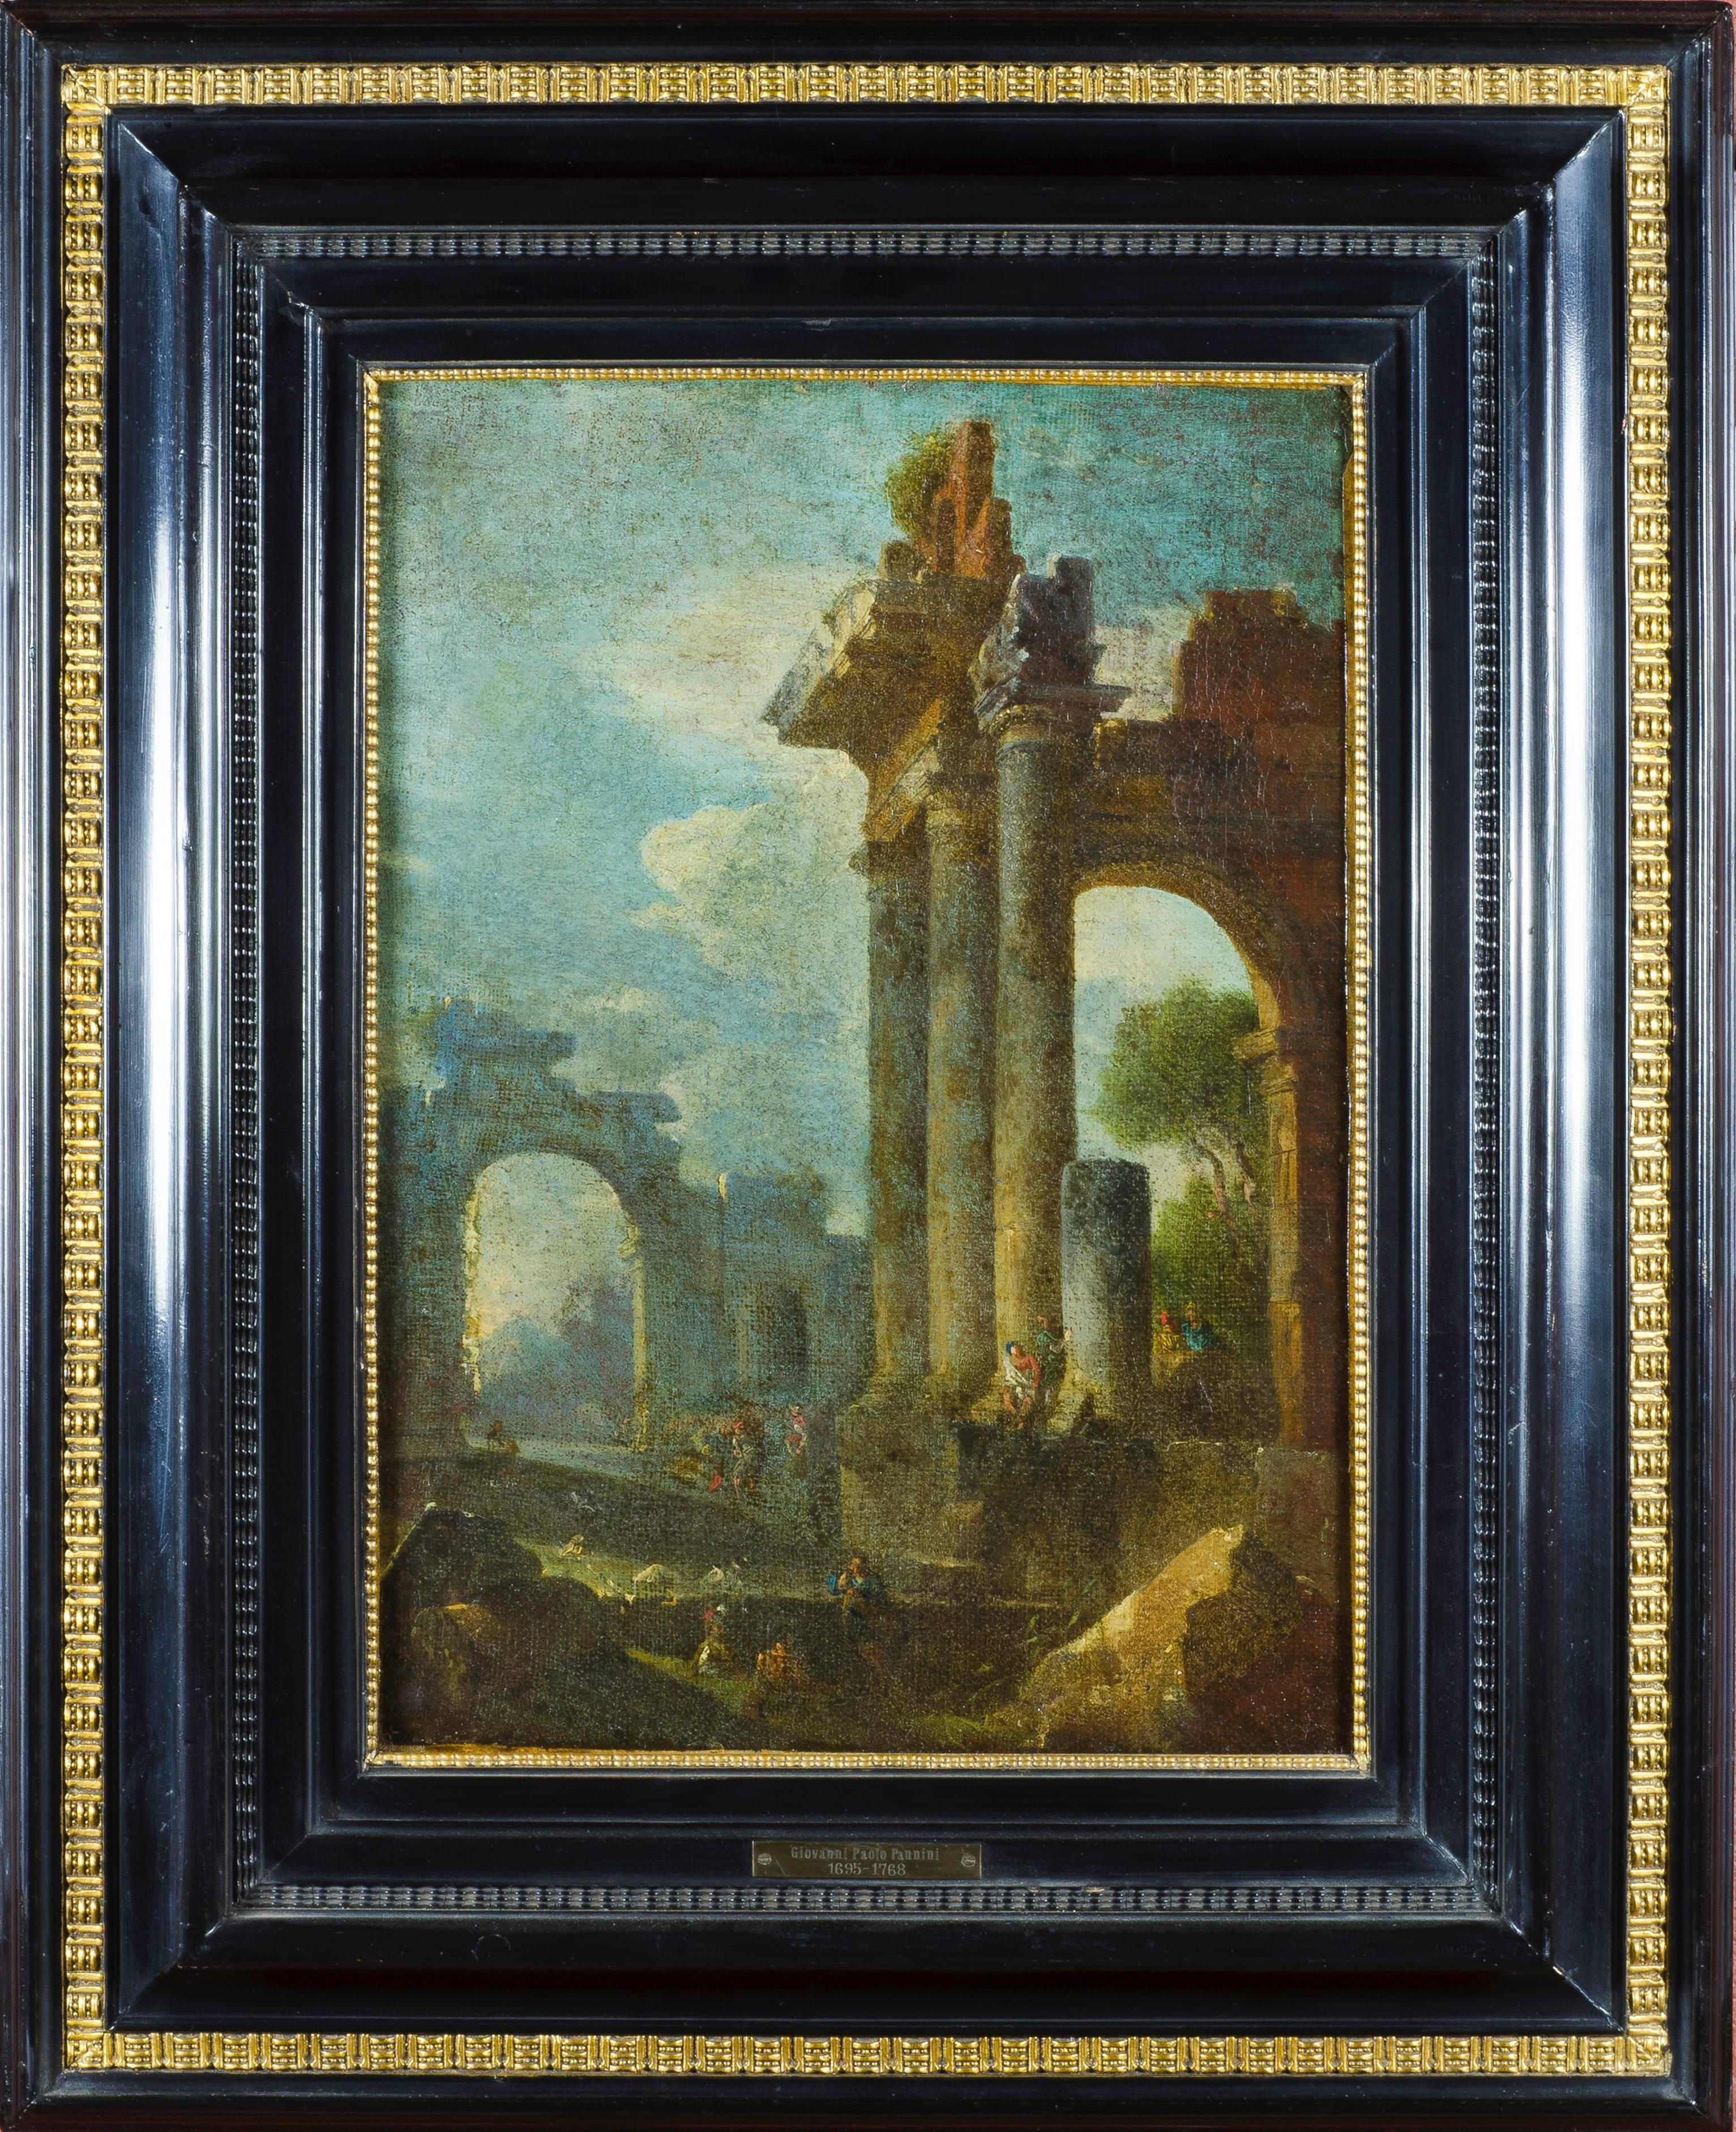 Unknown Landscape Painting - Accomplished 18th C. Roman School Grand Tour Architectural Ruins Painting